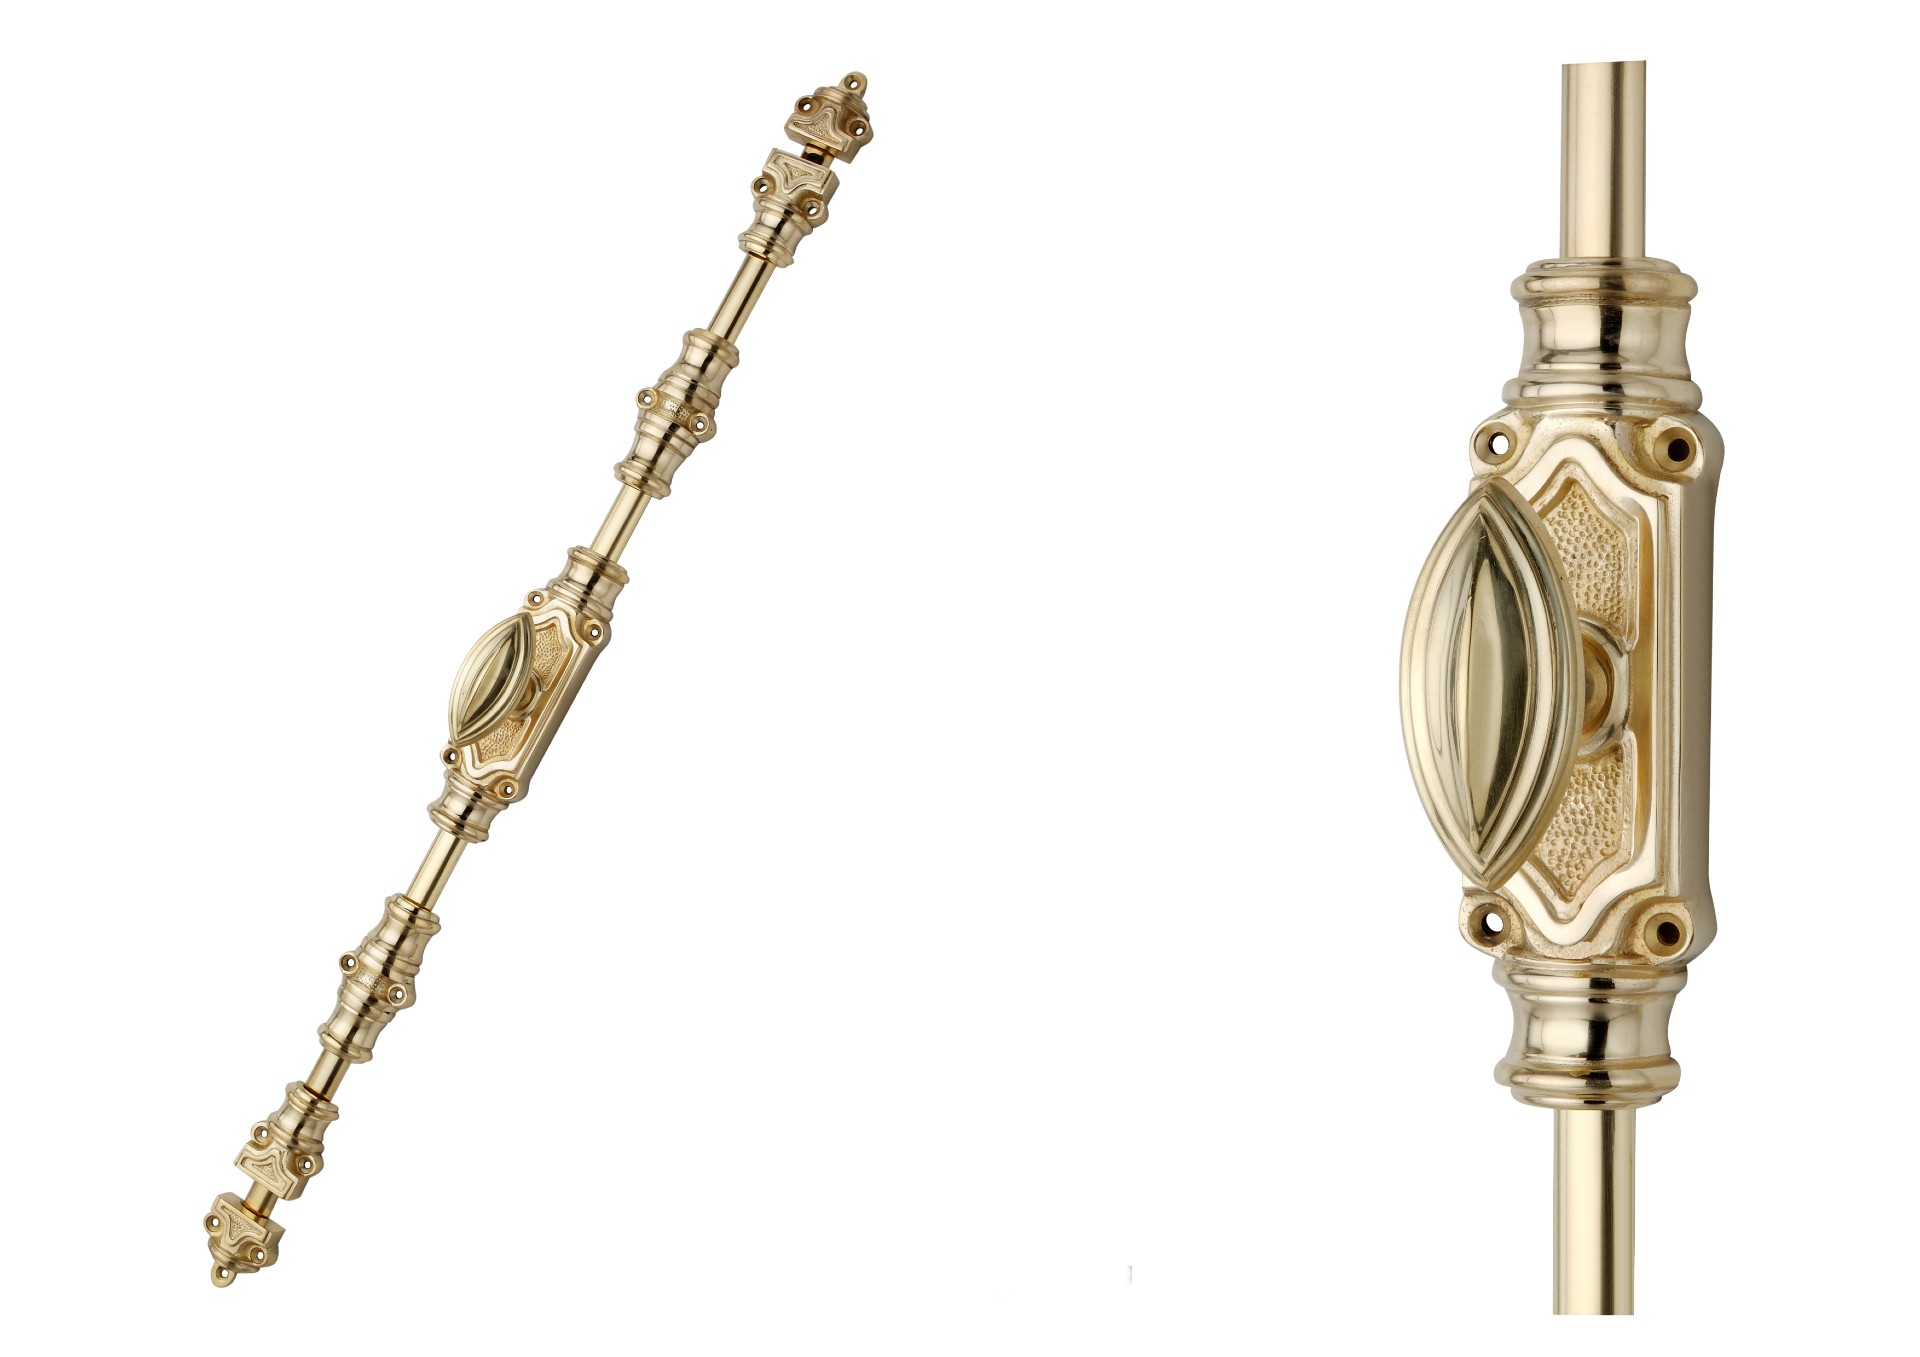 Plaine Stepped Espagnolette Bolt/cremone Bolts Upto 9 Feet Polished Brass Lacquered